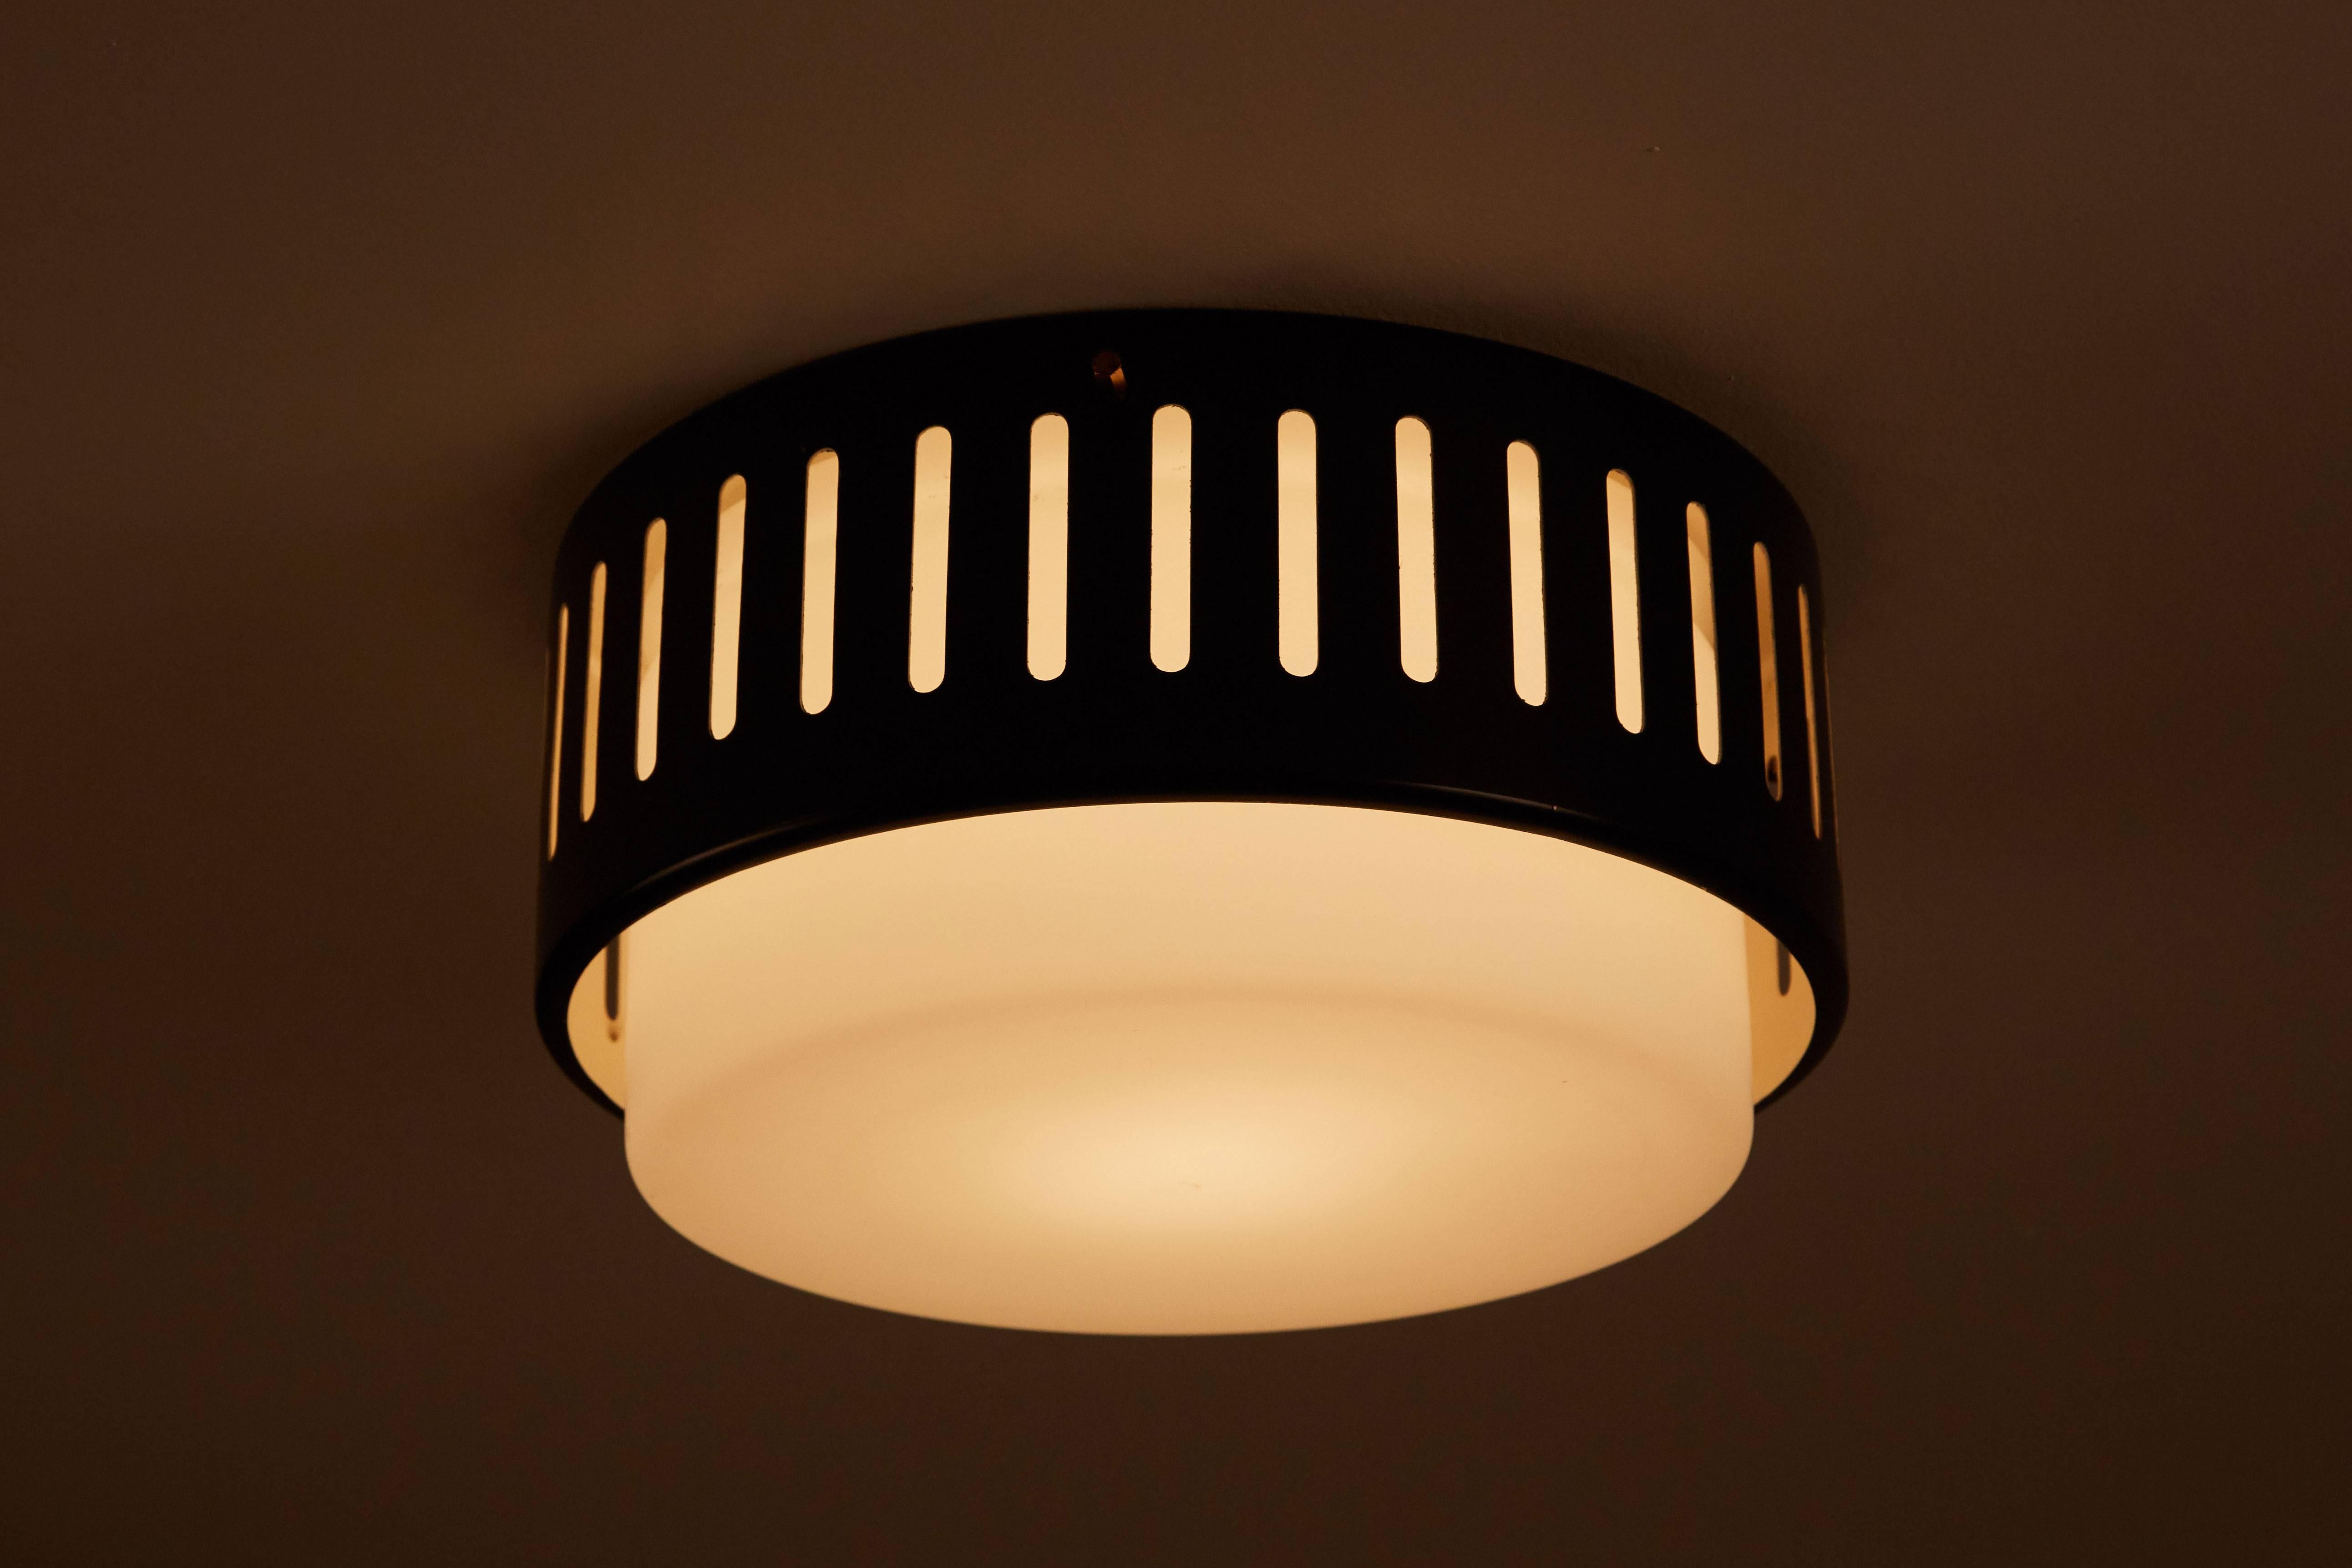 Flush mount ceiling light manufactured by Stilnovo in Italy, circa 1950s. Enameled, perforated metal with brushed satin glass diffuser. Retains original Stilnovo stamp. Wired for US junction boxes. Takes one E27 100w maximum bulb.